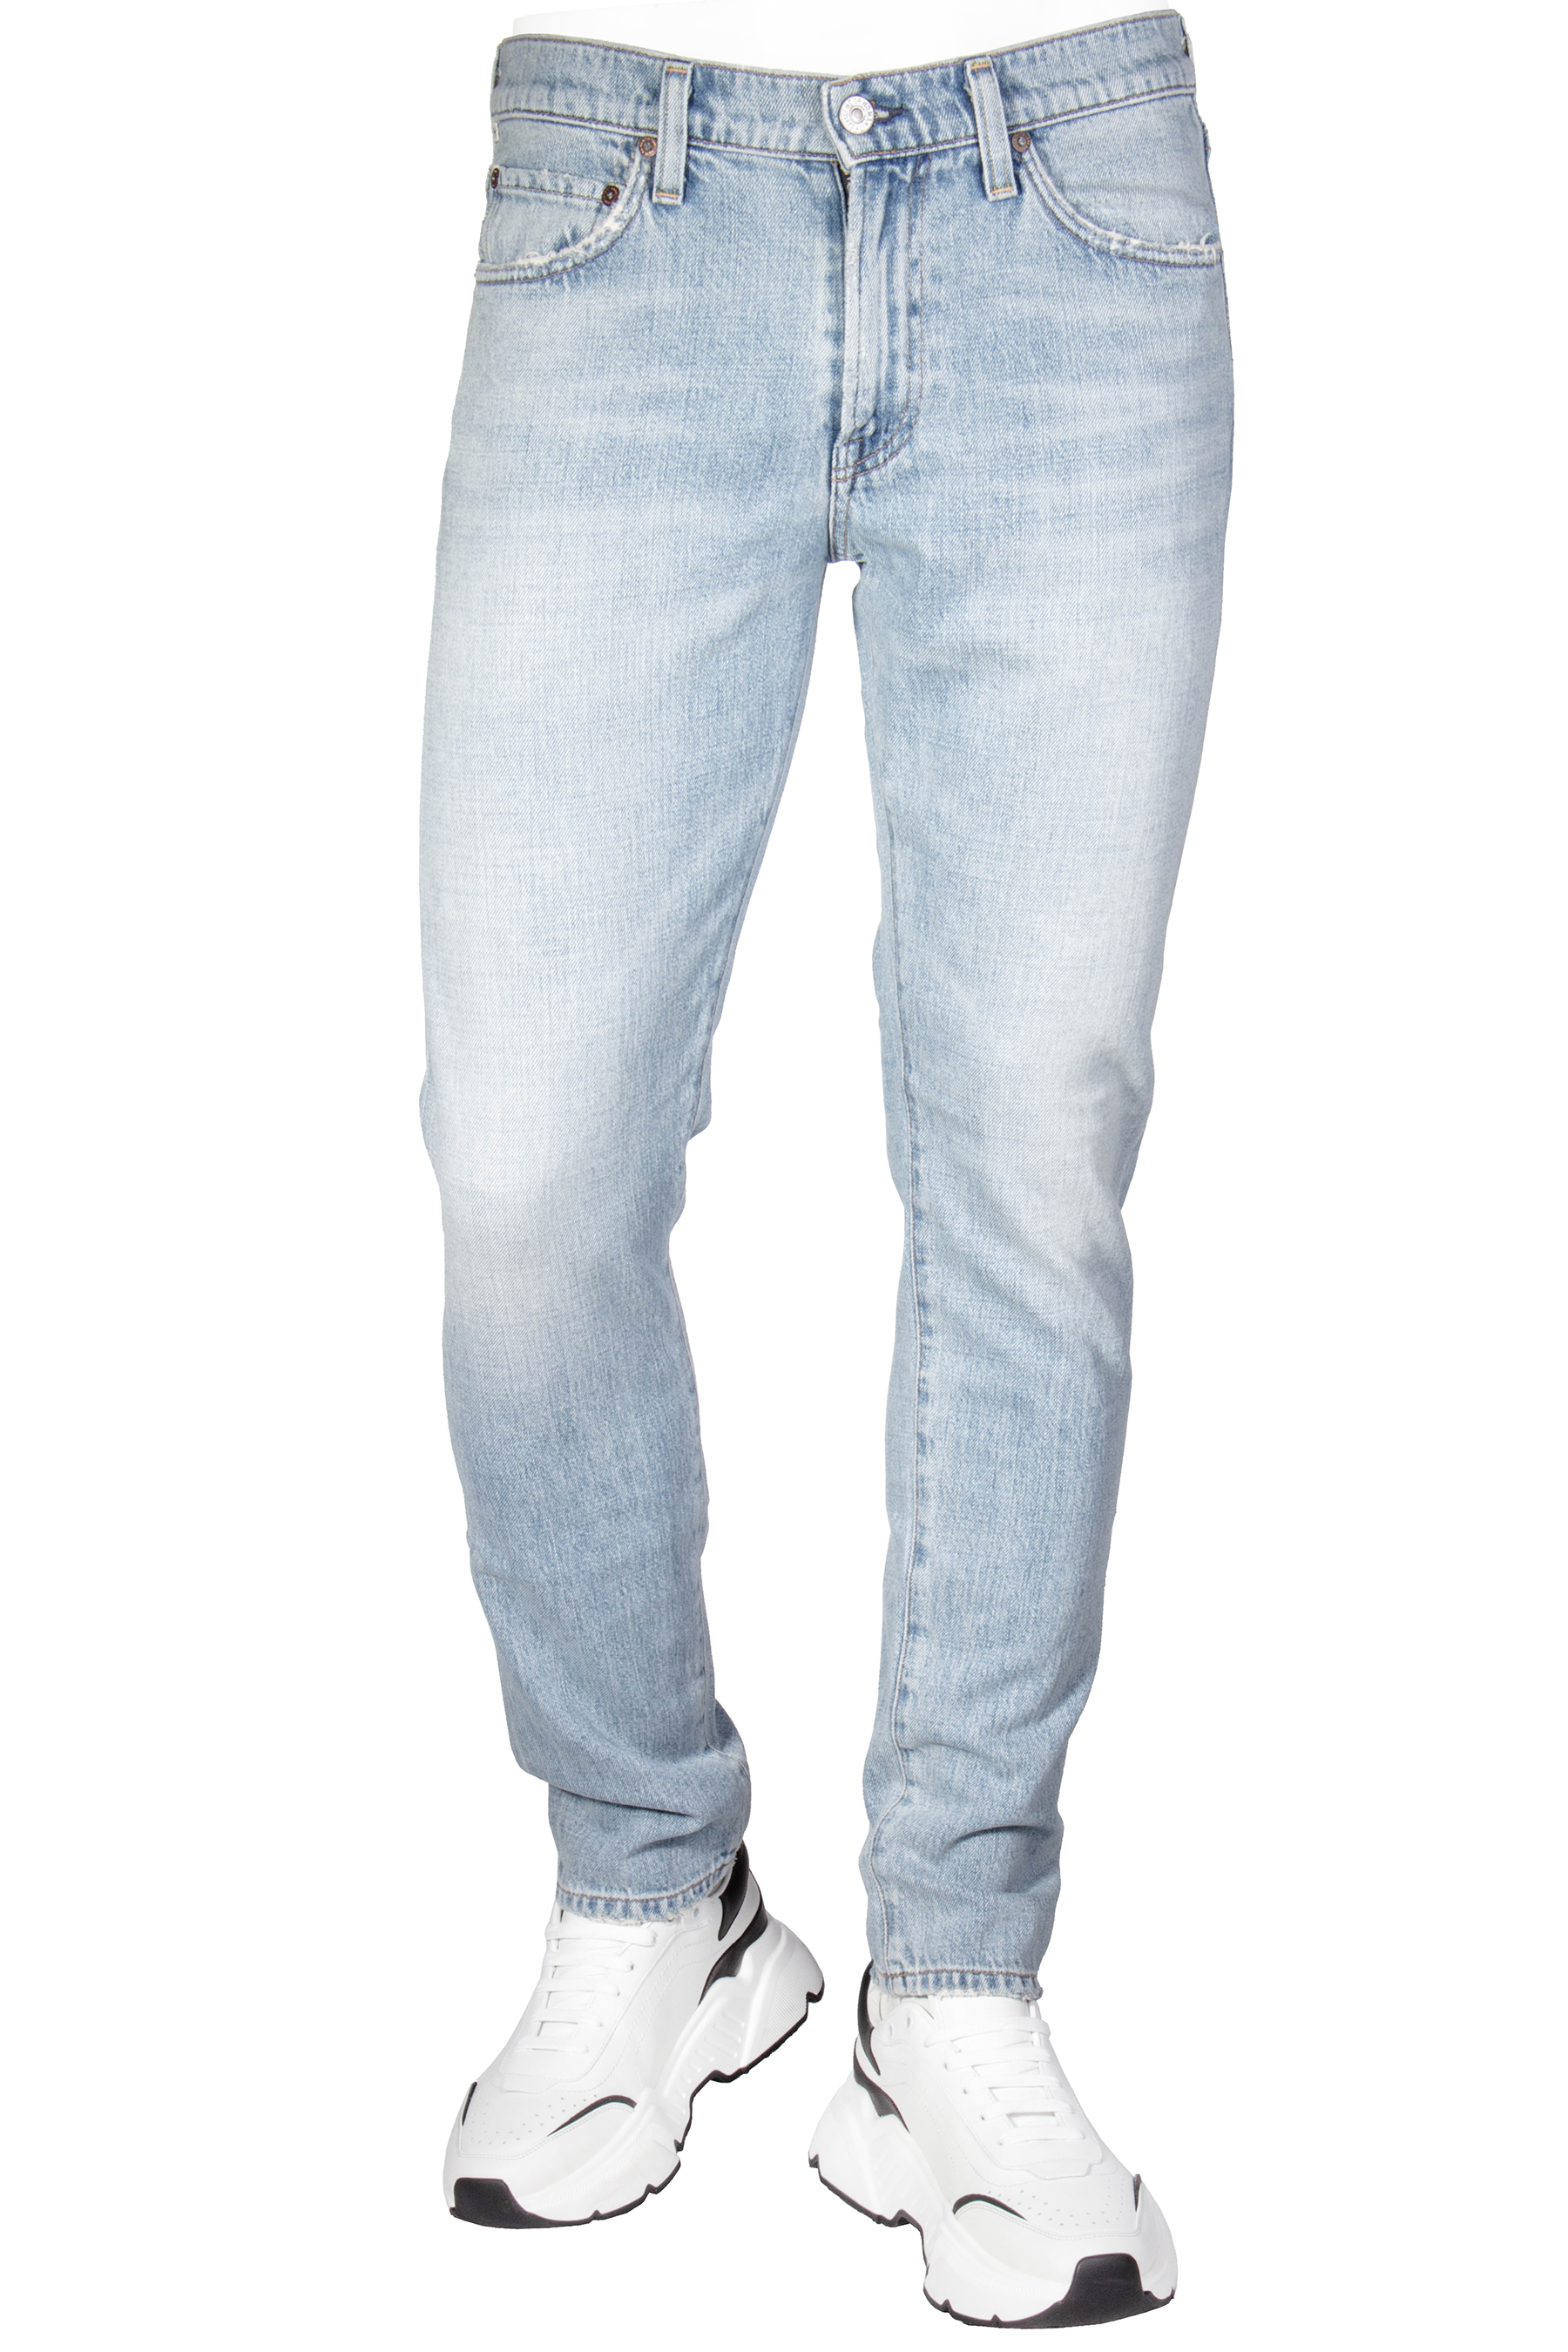 OF Hosen Jeans Jeans Jeans Kleidung HUMANITY CITIZENS Tapered Store | The Men mientus Lyric | & Slim | London | | Online